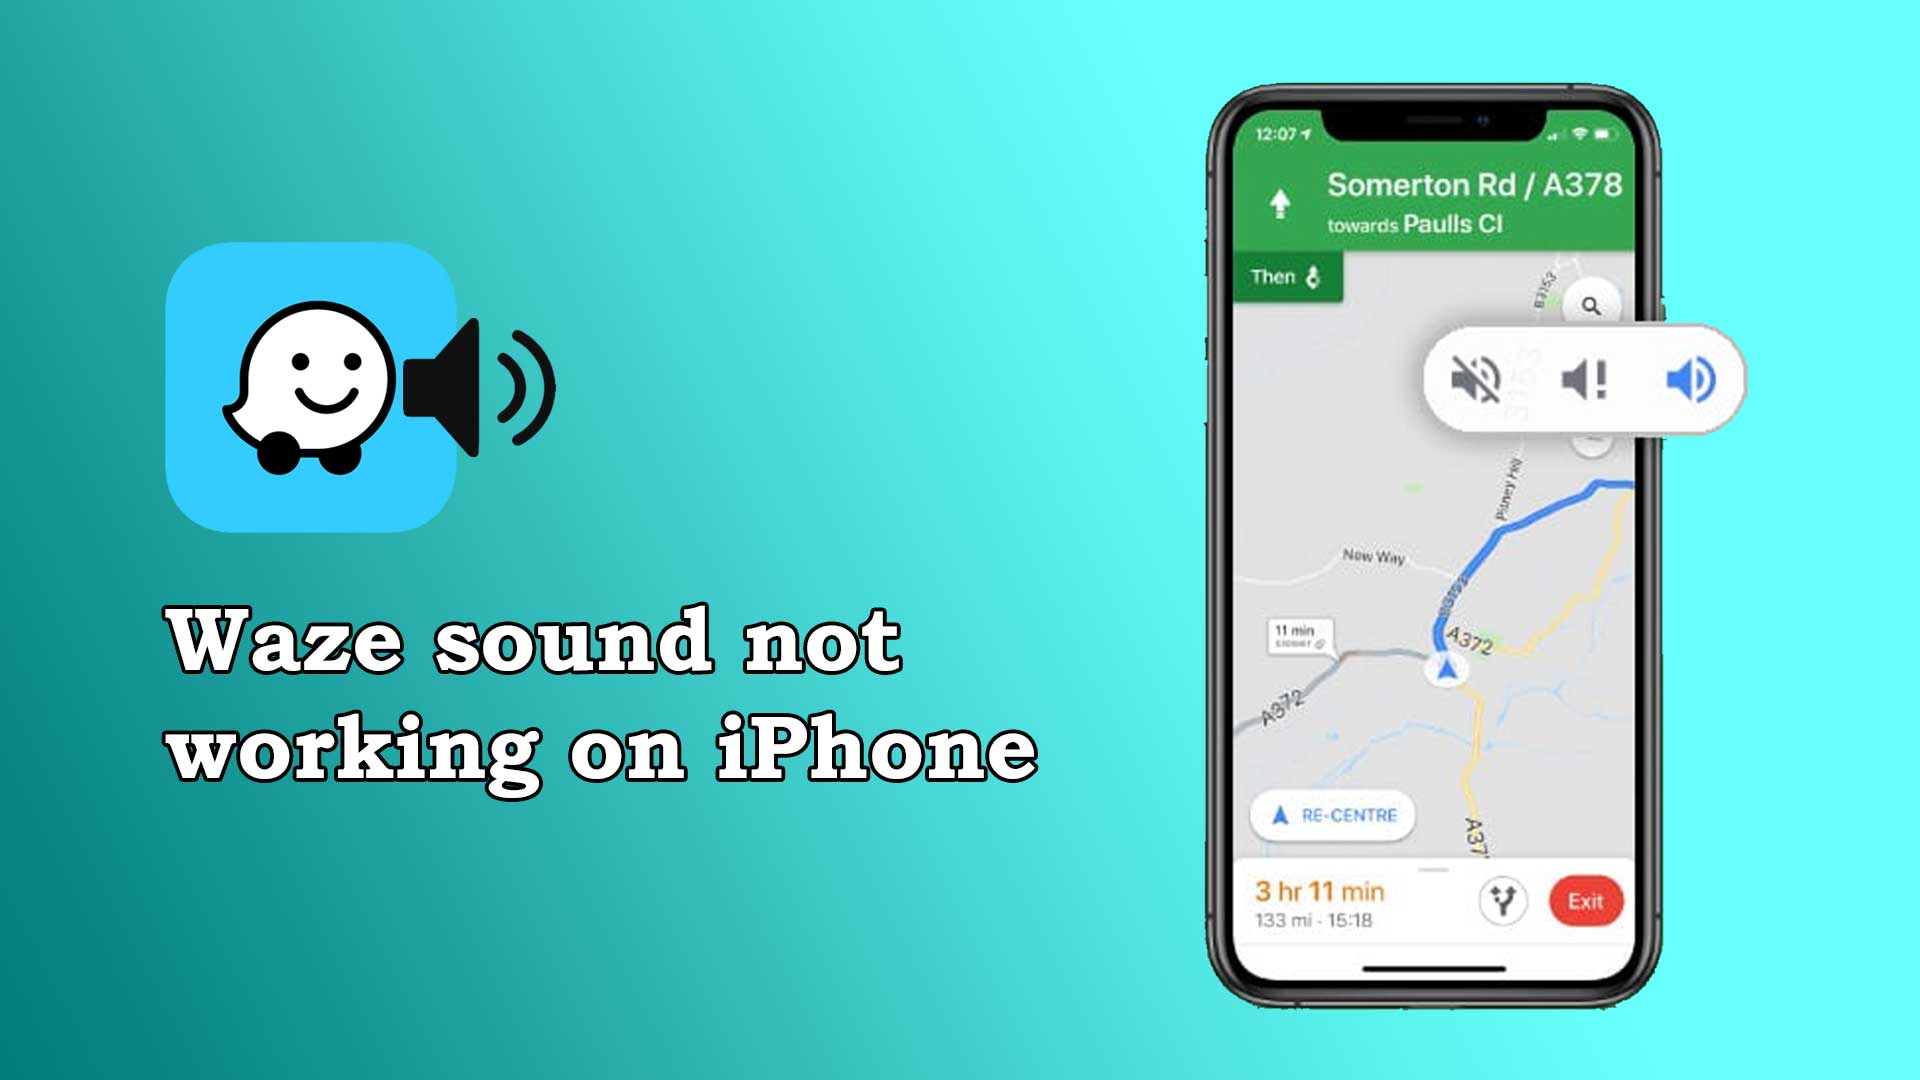 Waze sound not working on iPhone